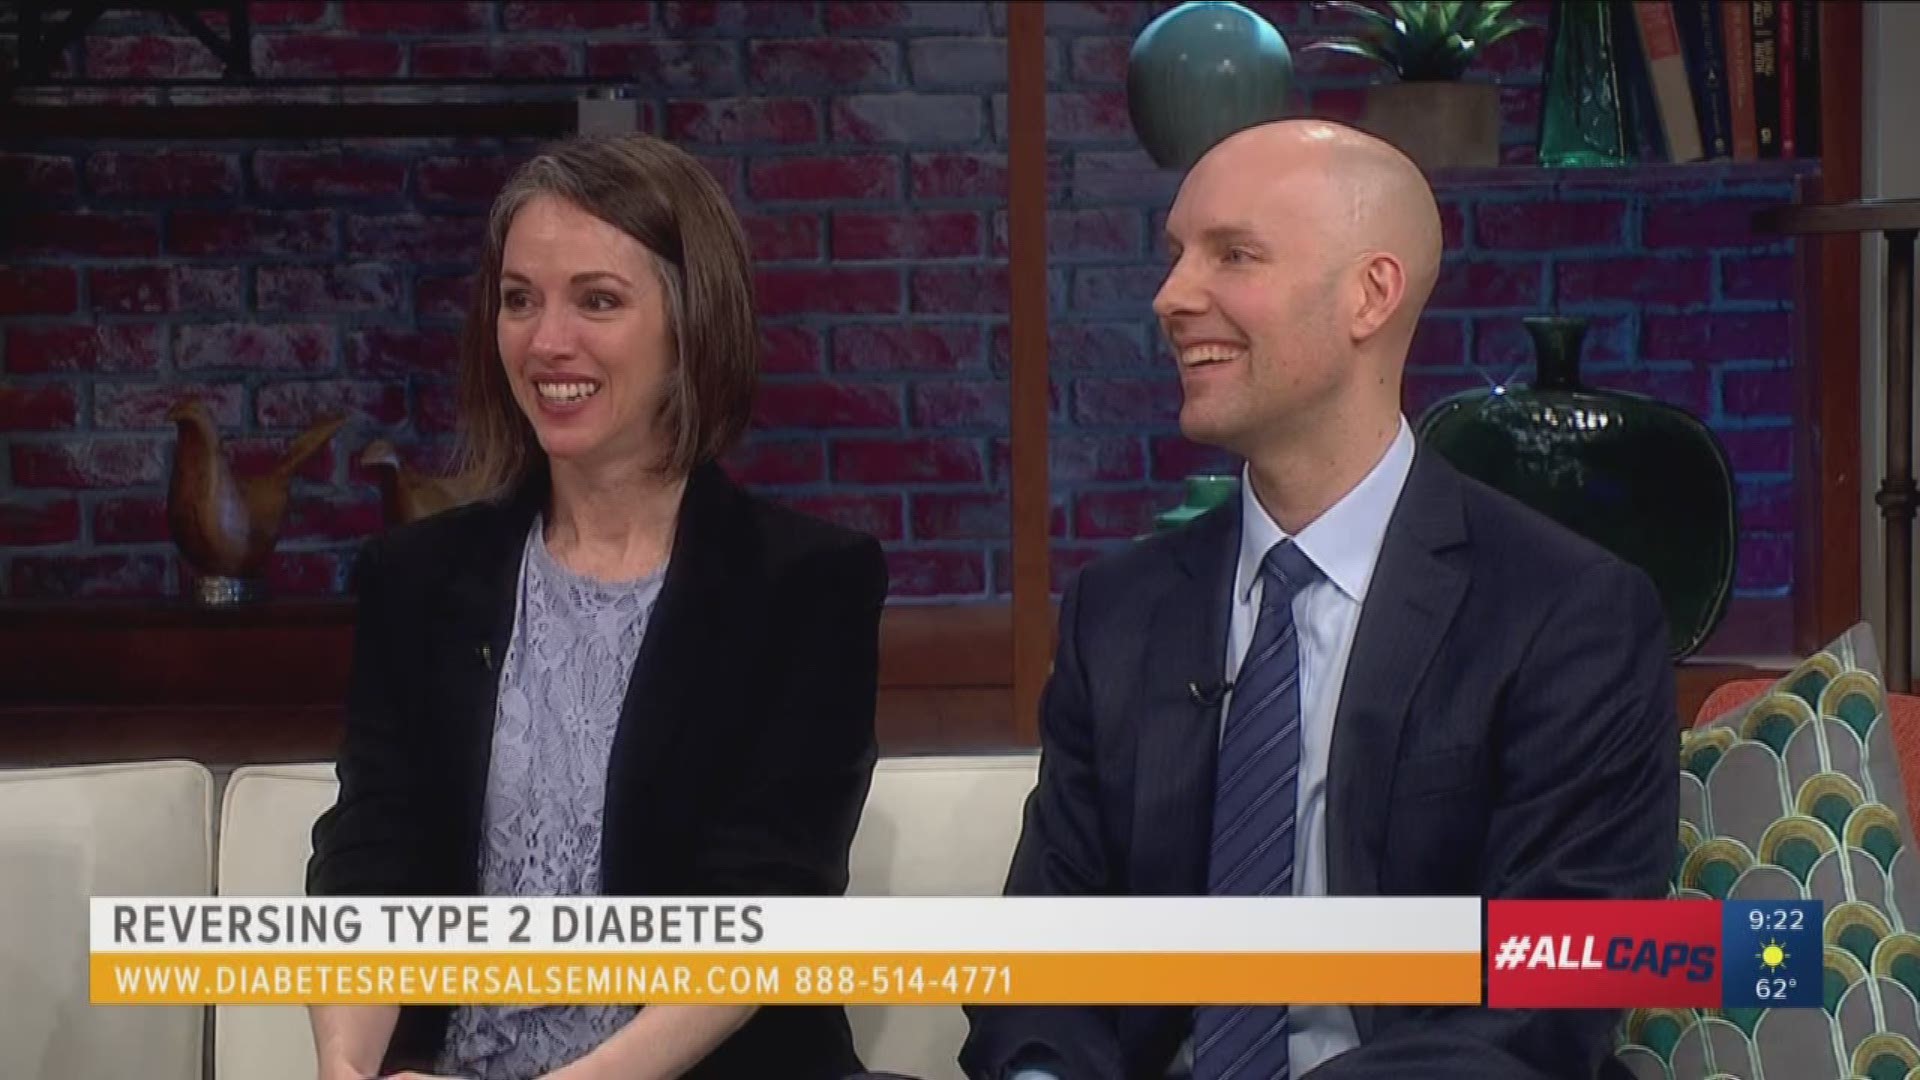 Doctors Stephanie and Tom Chaney of Living Health Integrative Medicine have tips for helping to reverse type II diabetes.